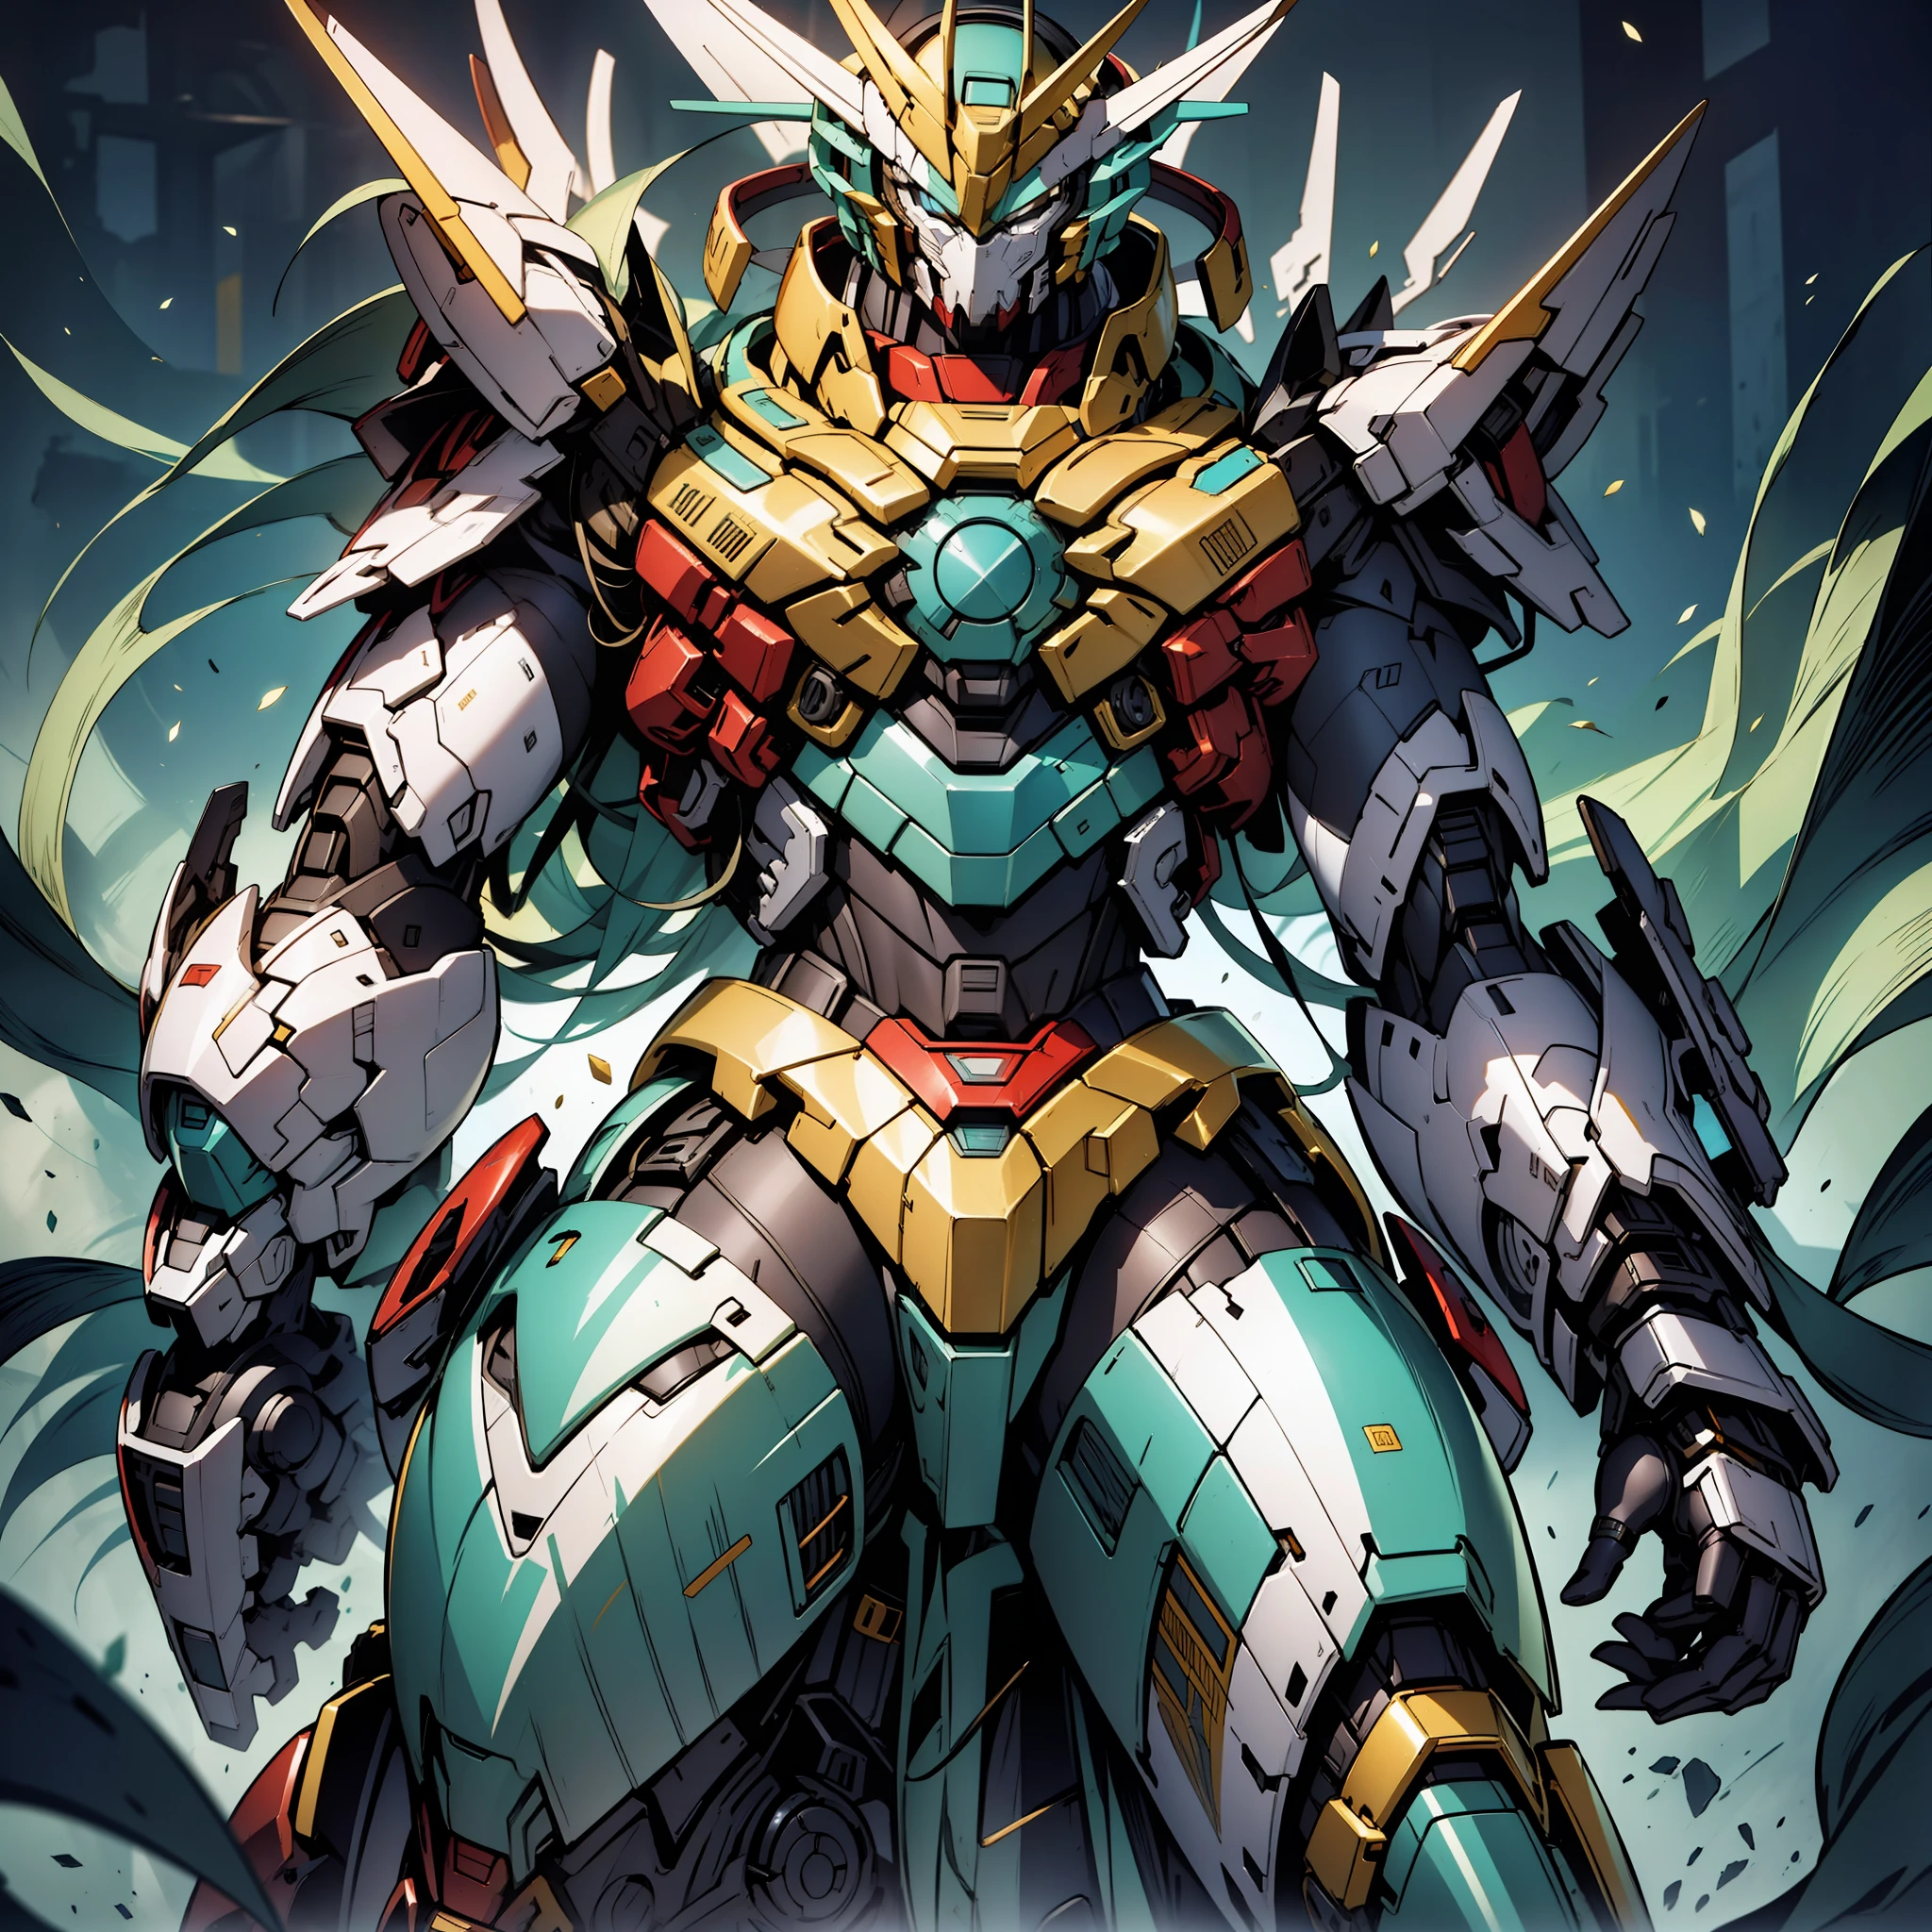 Golden Saint Seiya Limb Armor, Marvel Movie Iron Man Cuirass, (Gundam 00 Gundam Exia: 1.5), (Mecha) (Mechanical) (Armor), (Open leg: 1.3), Perfect, (Wide Angle), (Black Background: 1.6), Best Quality, Masterpiece, Super Resolution, (Reality: 1.4), 1boy, Broad Shoulders, Cold Eyes, Crazy Details, (Hip Folds: 1.2), Lower Chest, Hands Crossed at the Waist, Unrealistic Engine Style, Boca Effect, David S. La Chapelle style lens, bioluminescent palette: light blue, light gold, bright white, wide angle, ultra-fine, cinematic still life, vibrant, Sakimichan style, perfect eyes, highest image quality 8K, inspired by Harry Winston, Canon EOS R 6 shooting masterpiece "Chaos 50,--, under eye mole, ray tracing, surrealism, textured skin, metallic sheen, facing the viewer